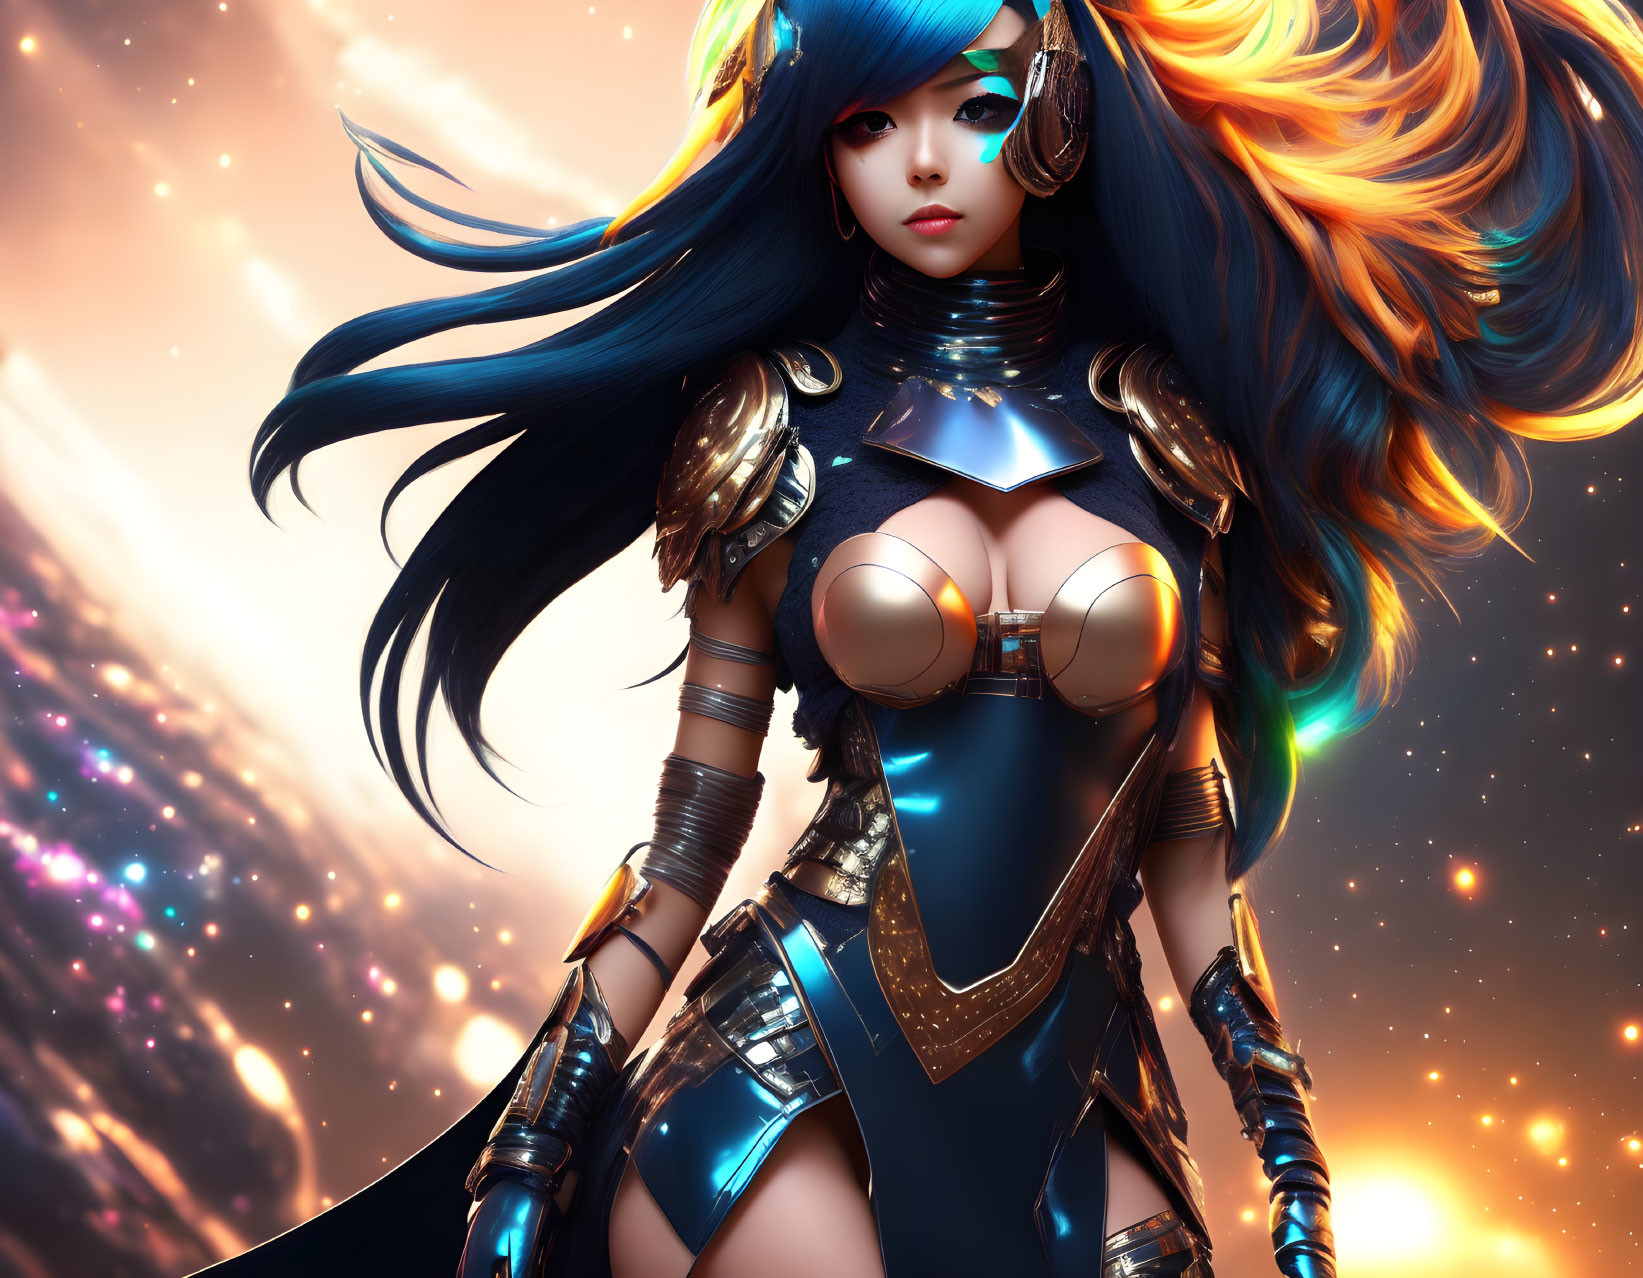 Futuristic digital artwork: Female character with long blue hair in armor on orange cosmic background